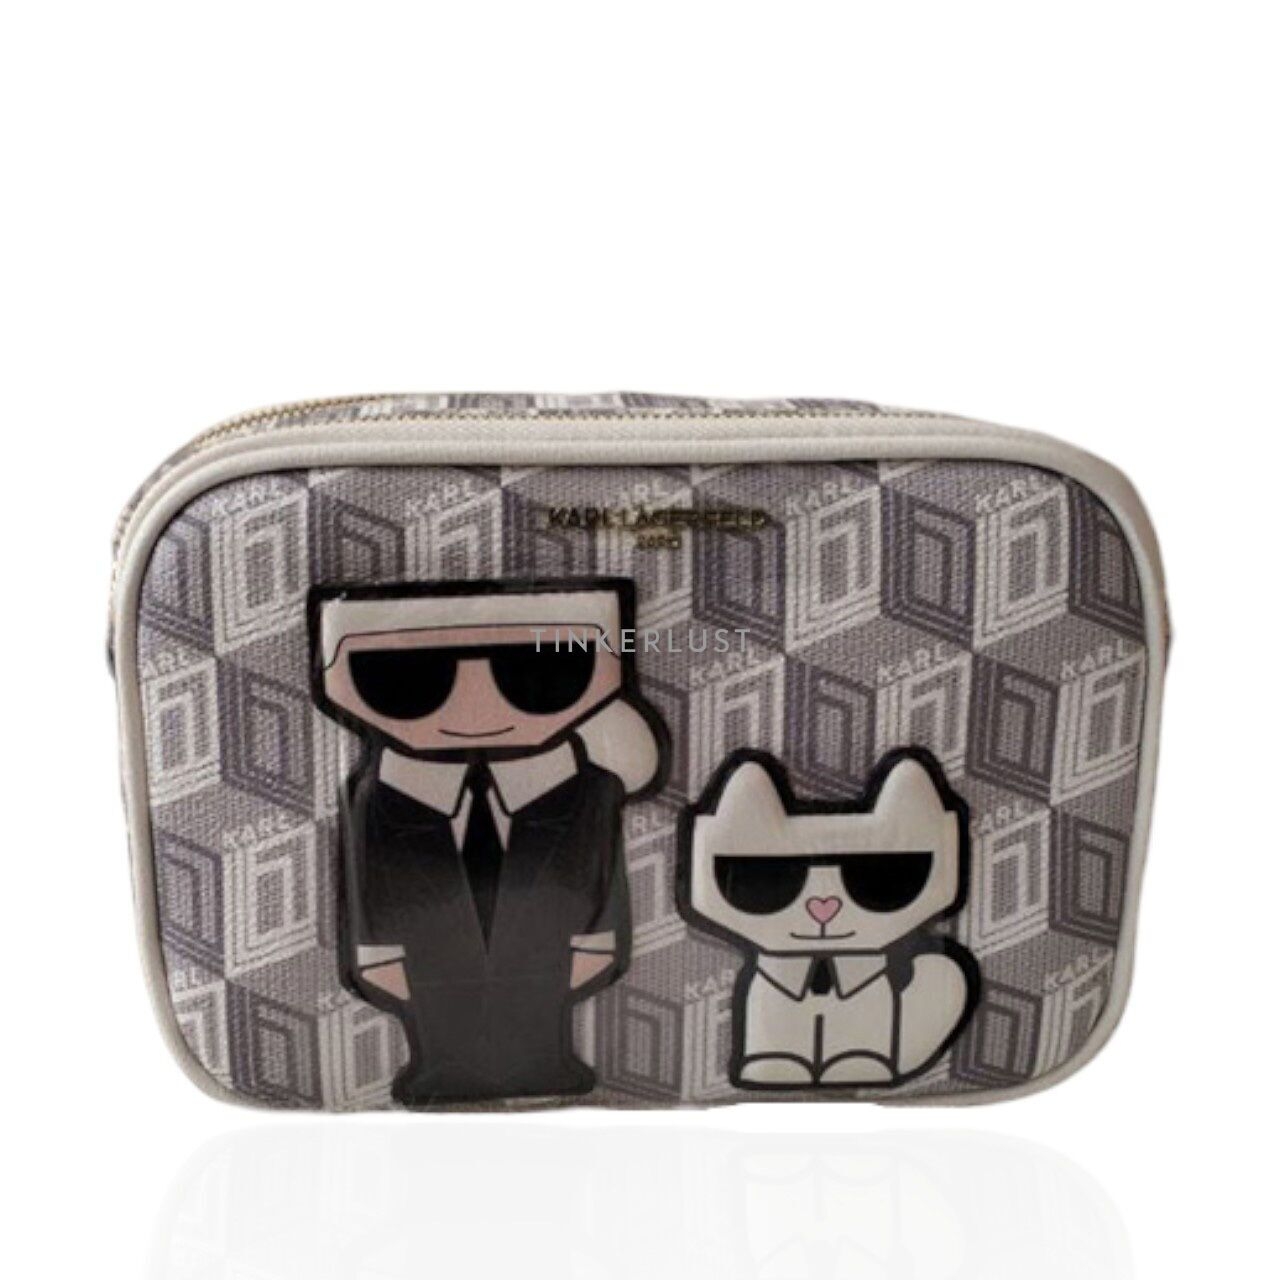 Karl Lagerfeld Iconic Camera Bag in Grey with Two Zipper Sling Bag	